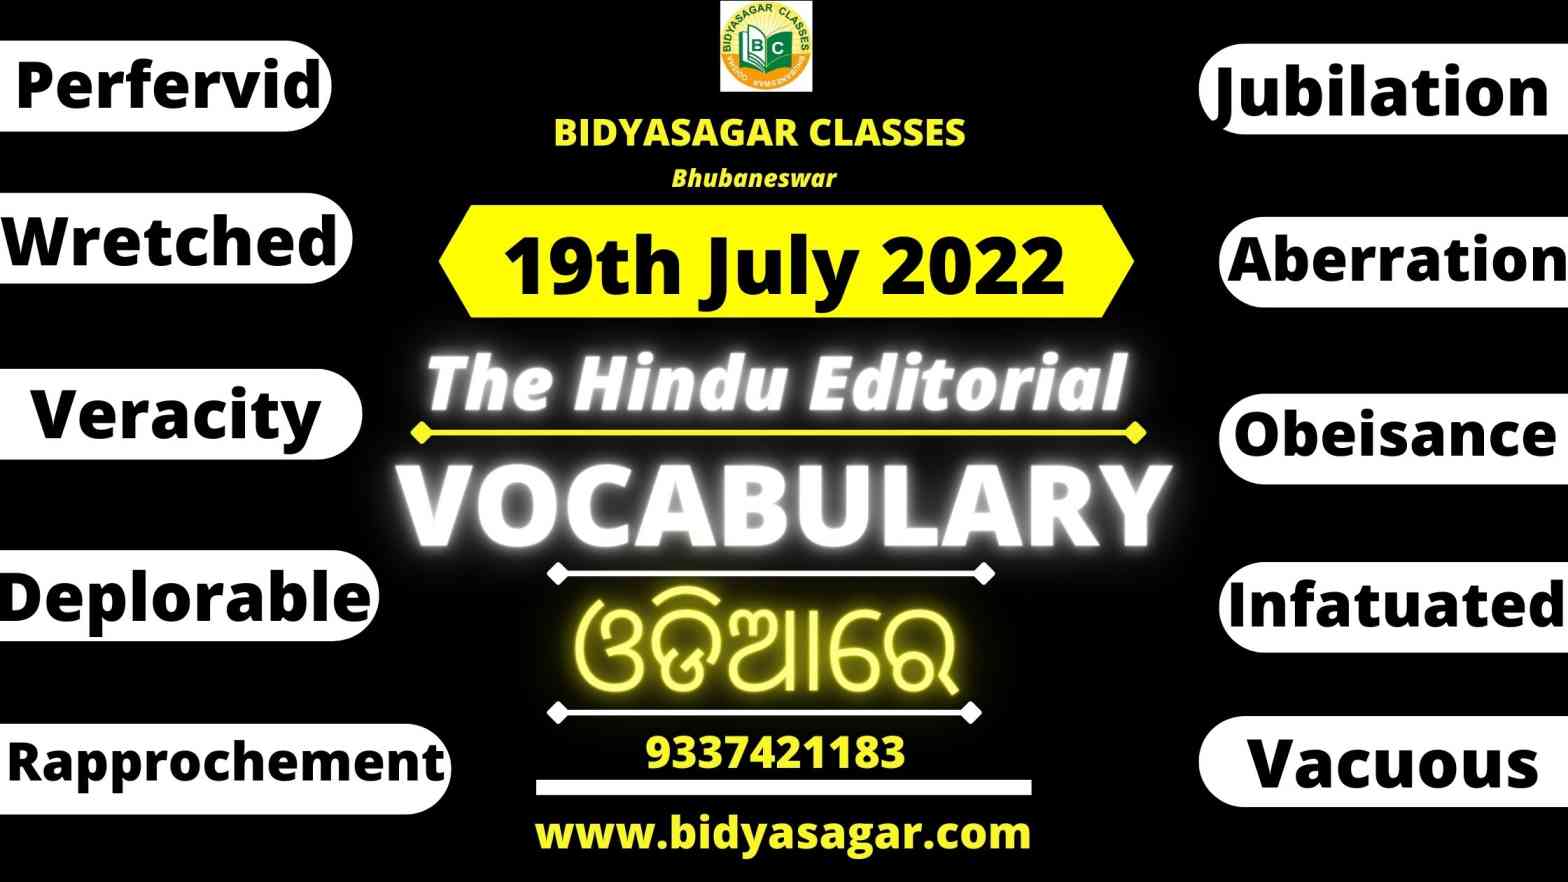 The Hindu Editorial Vocabulary of 19th July 2022